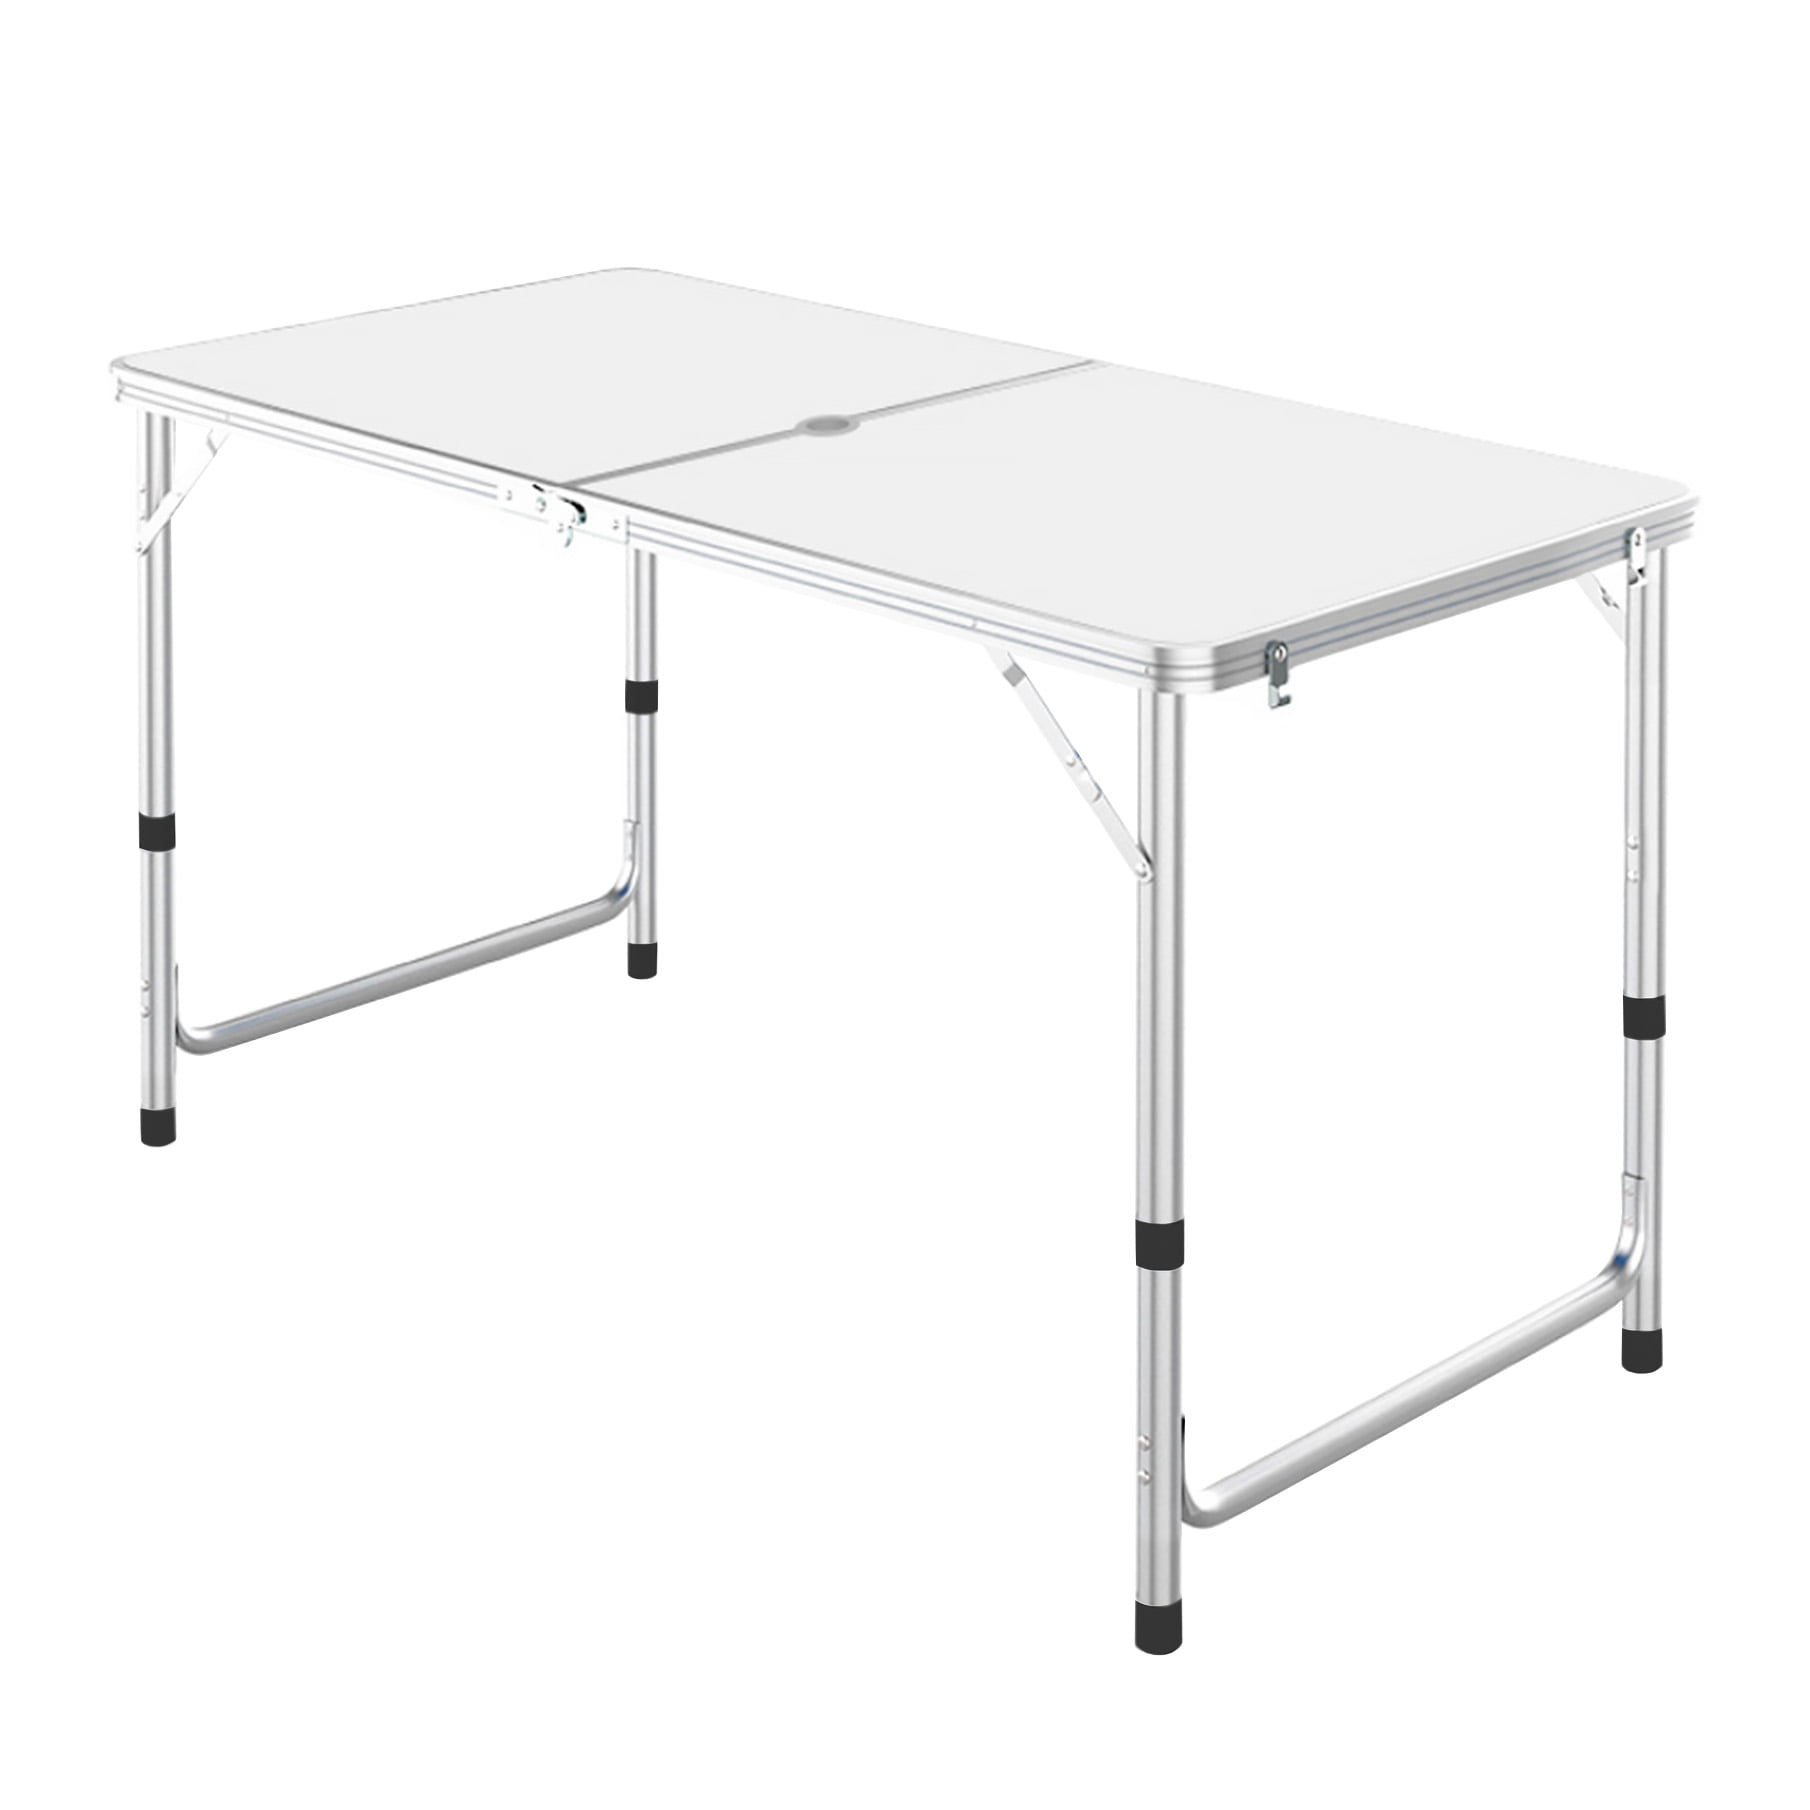 Details about   Outdoor Aluminum Alloy Folding Table Portable Ultra-Light Picnic Camping 